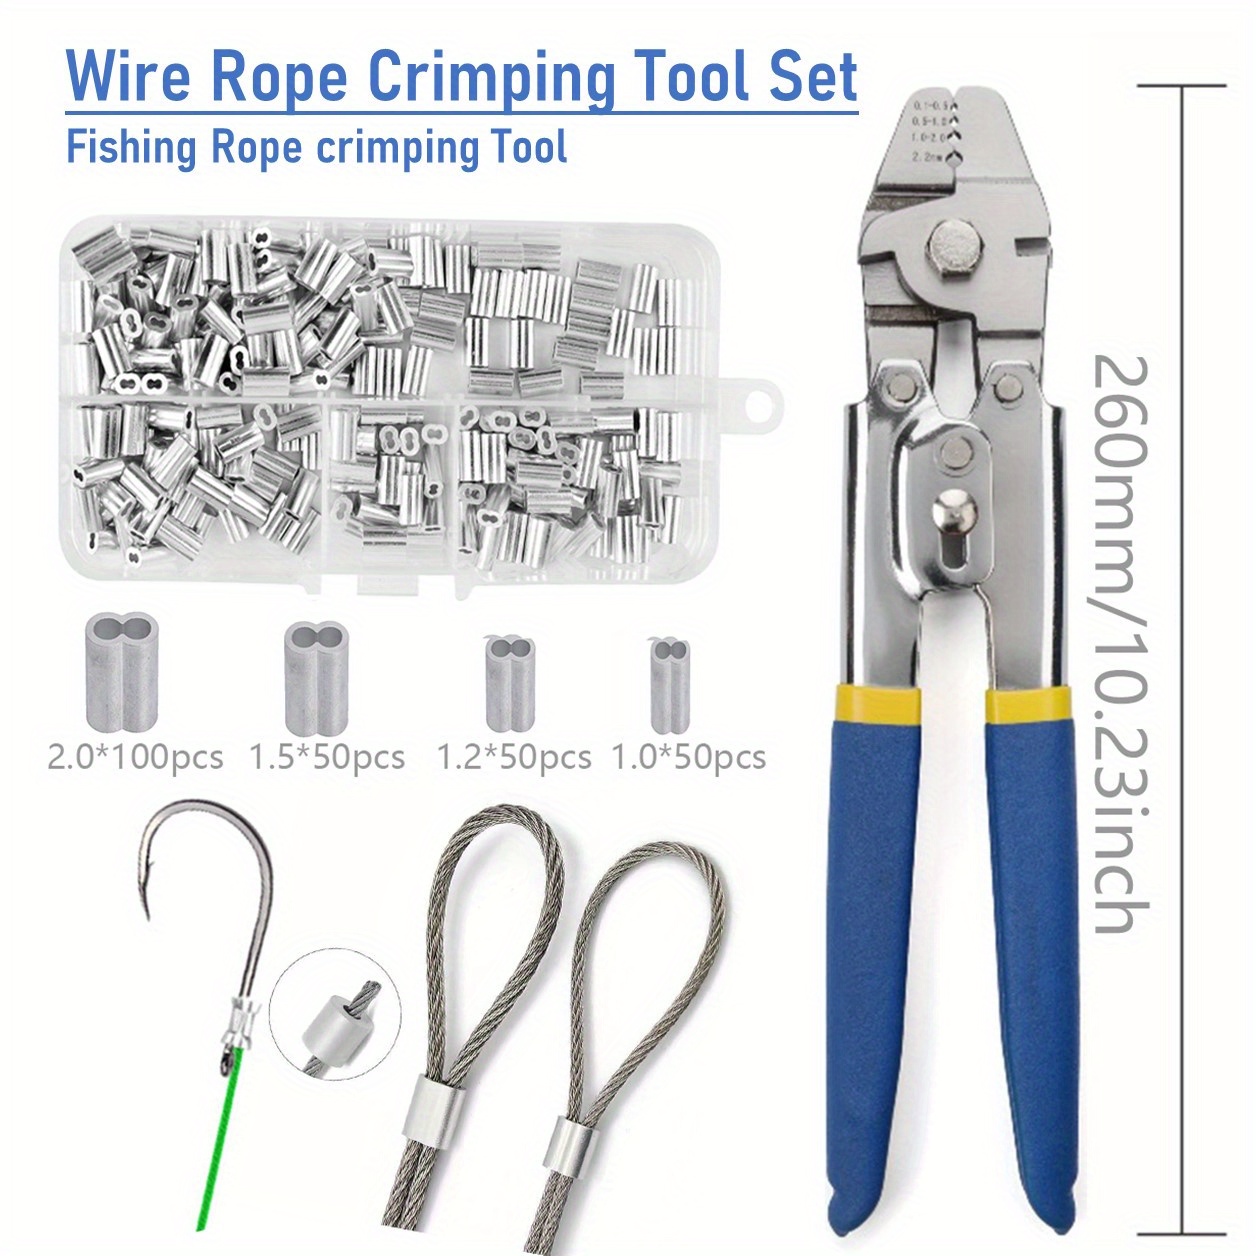 Stainless Steel Fishing Jewelry Pliers Set Wire Rope Crimping Tool